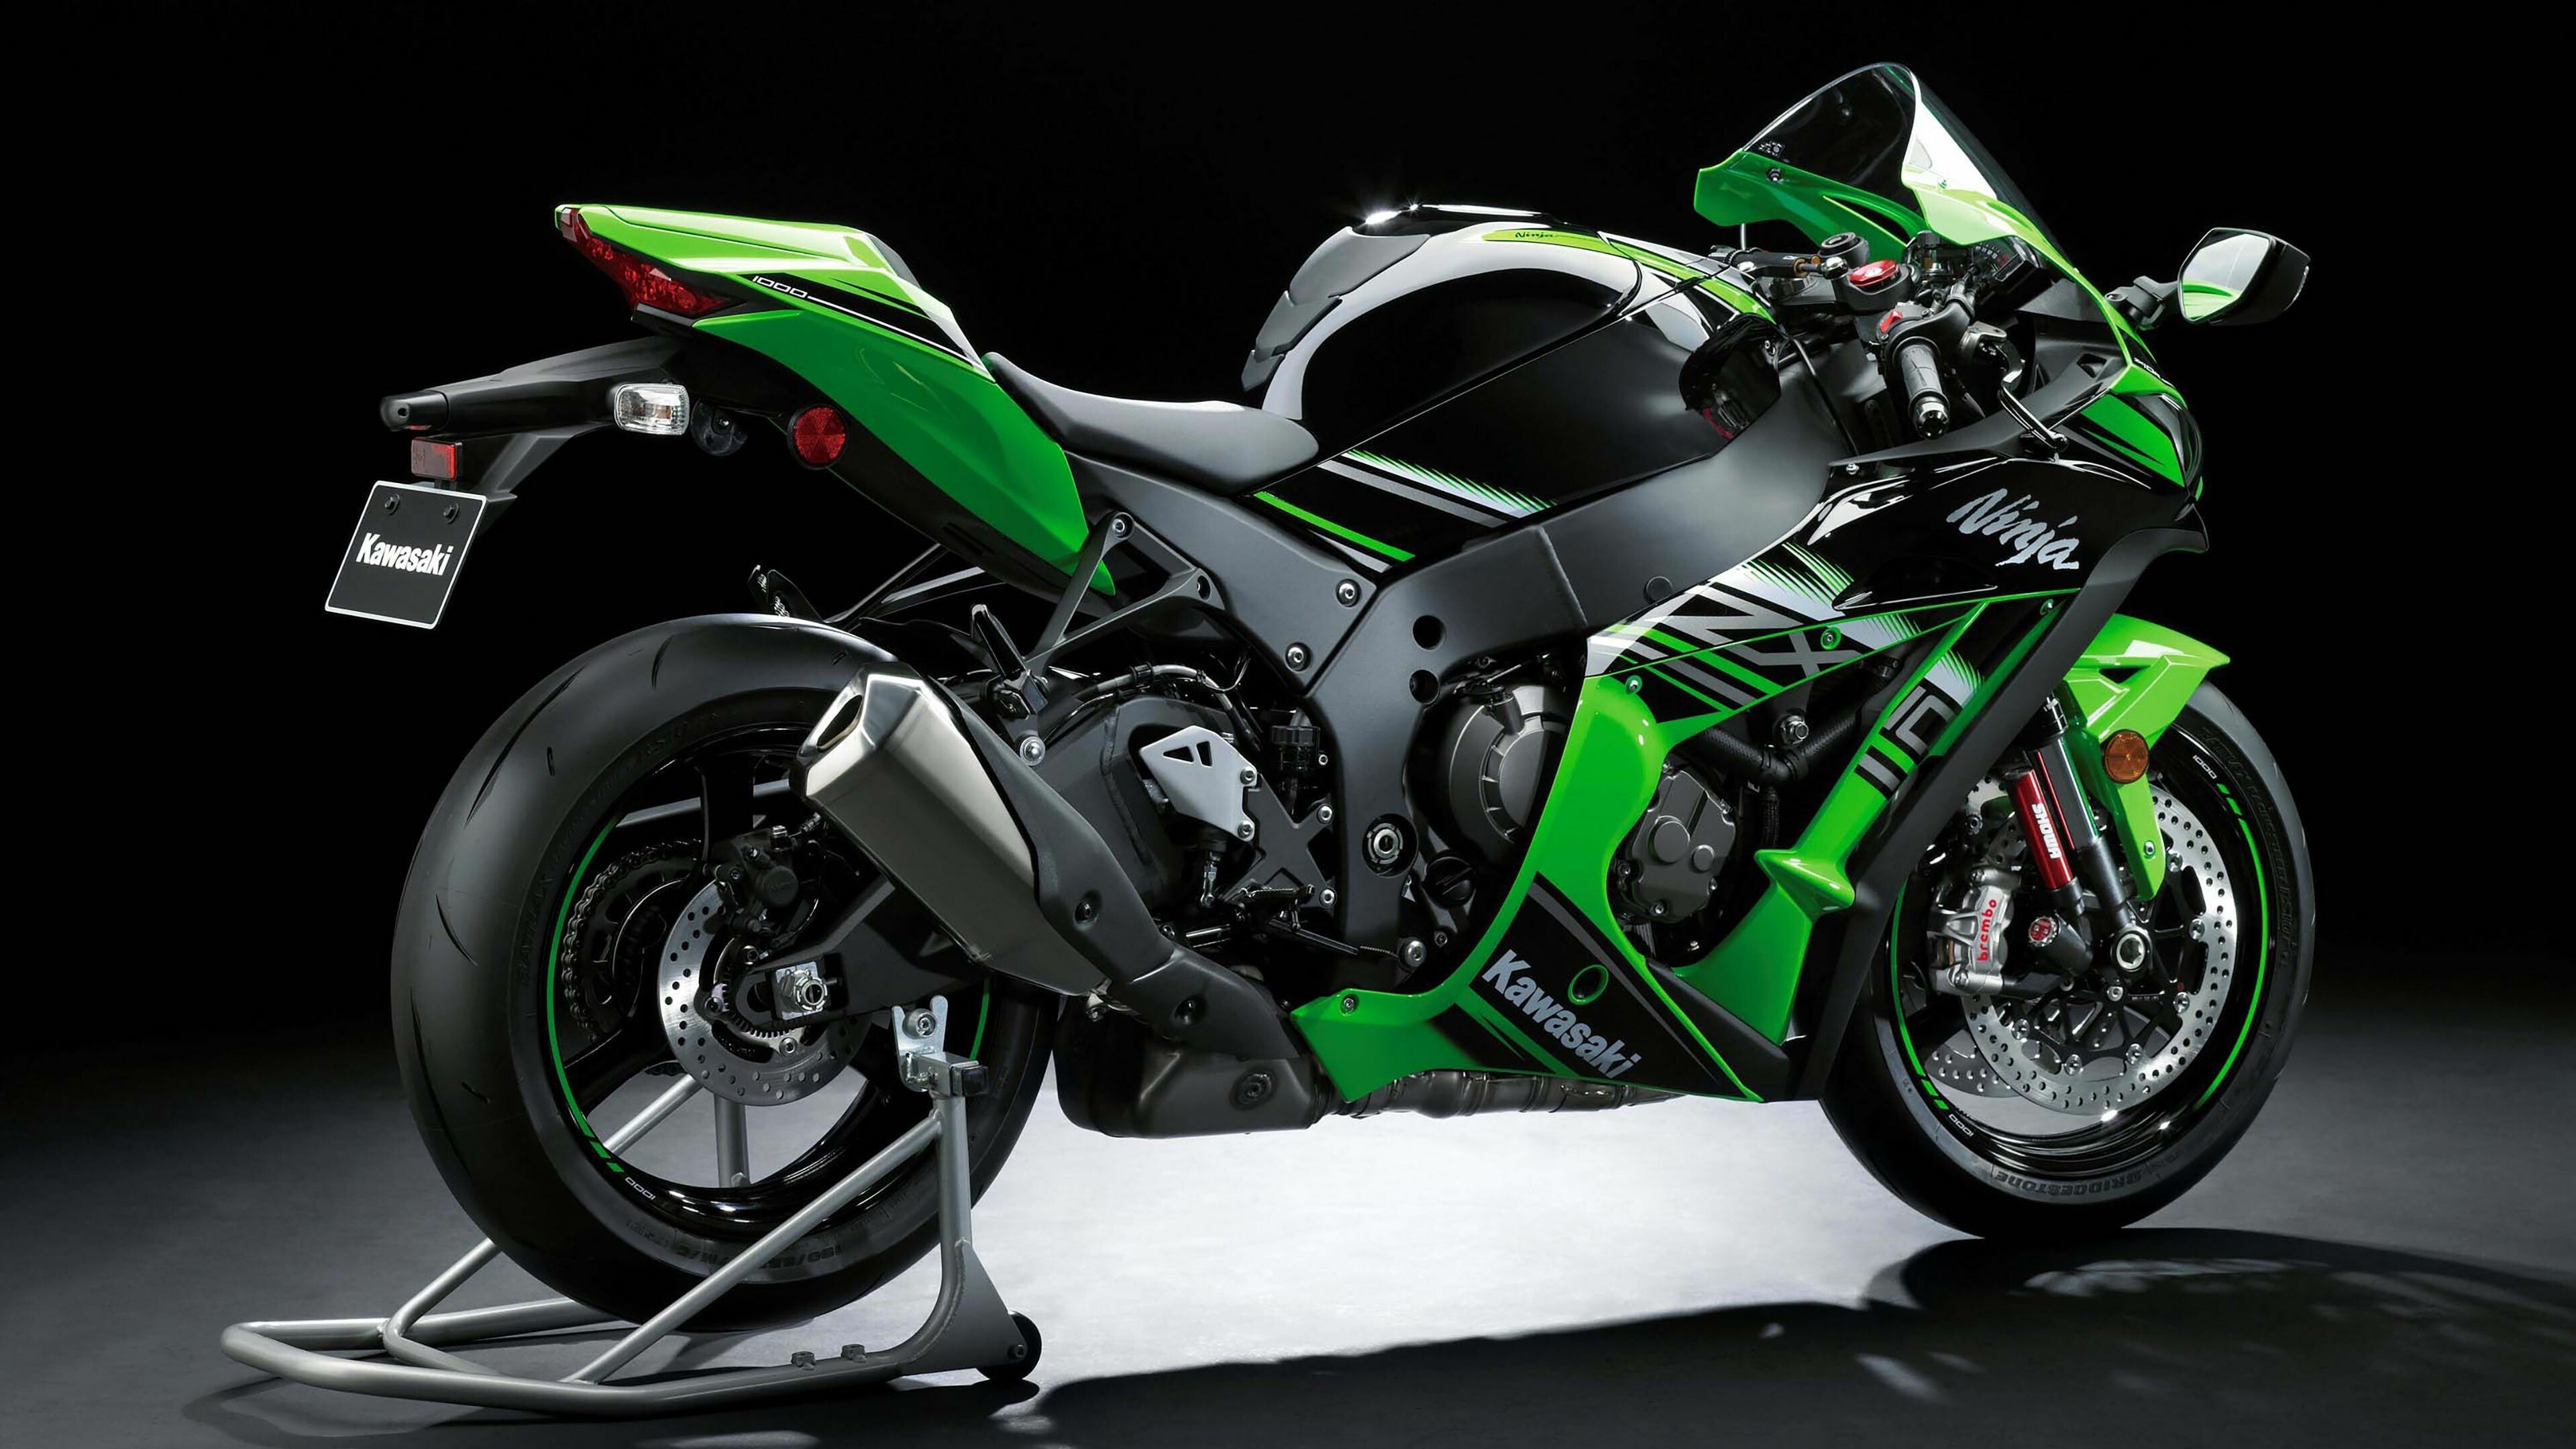 Kawasaki Ninja ZX: ZX10, With a top speed of 165 miles per hour, it was the fastest production motorcycle in 1988. 3840x2160 4K Wallpaper.